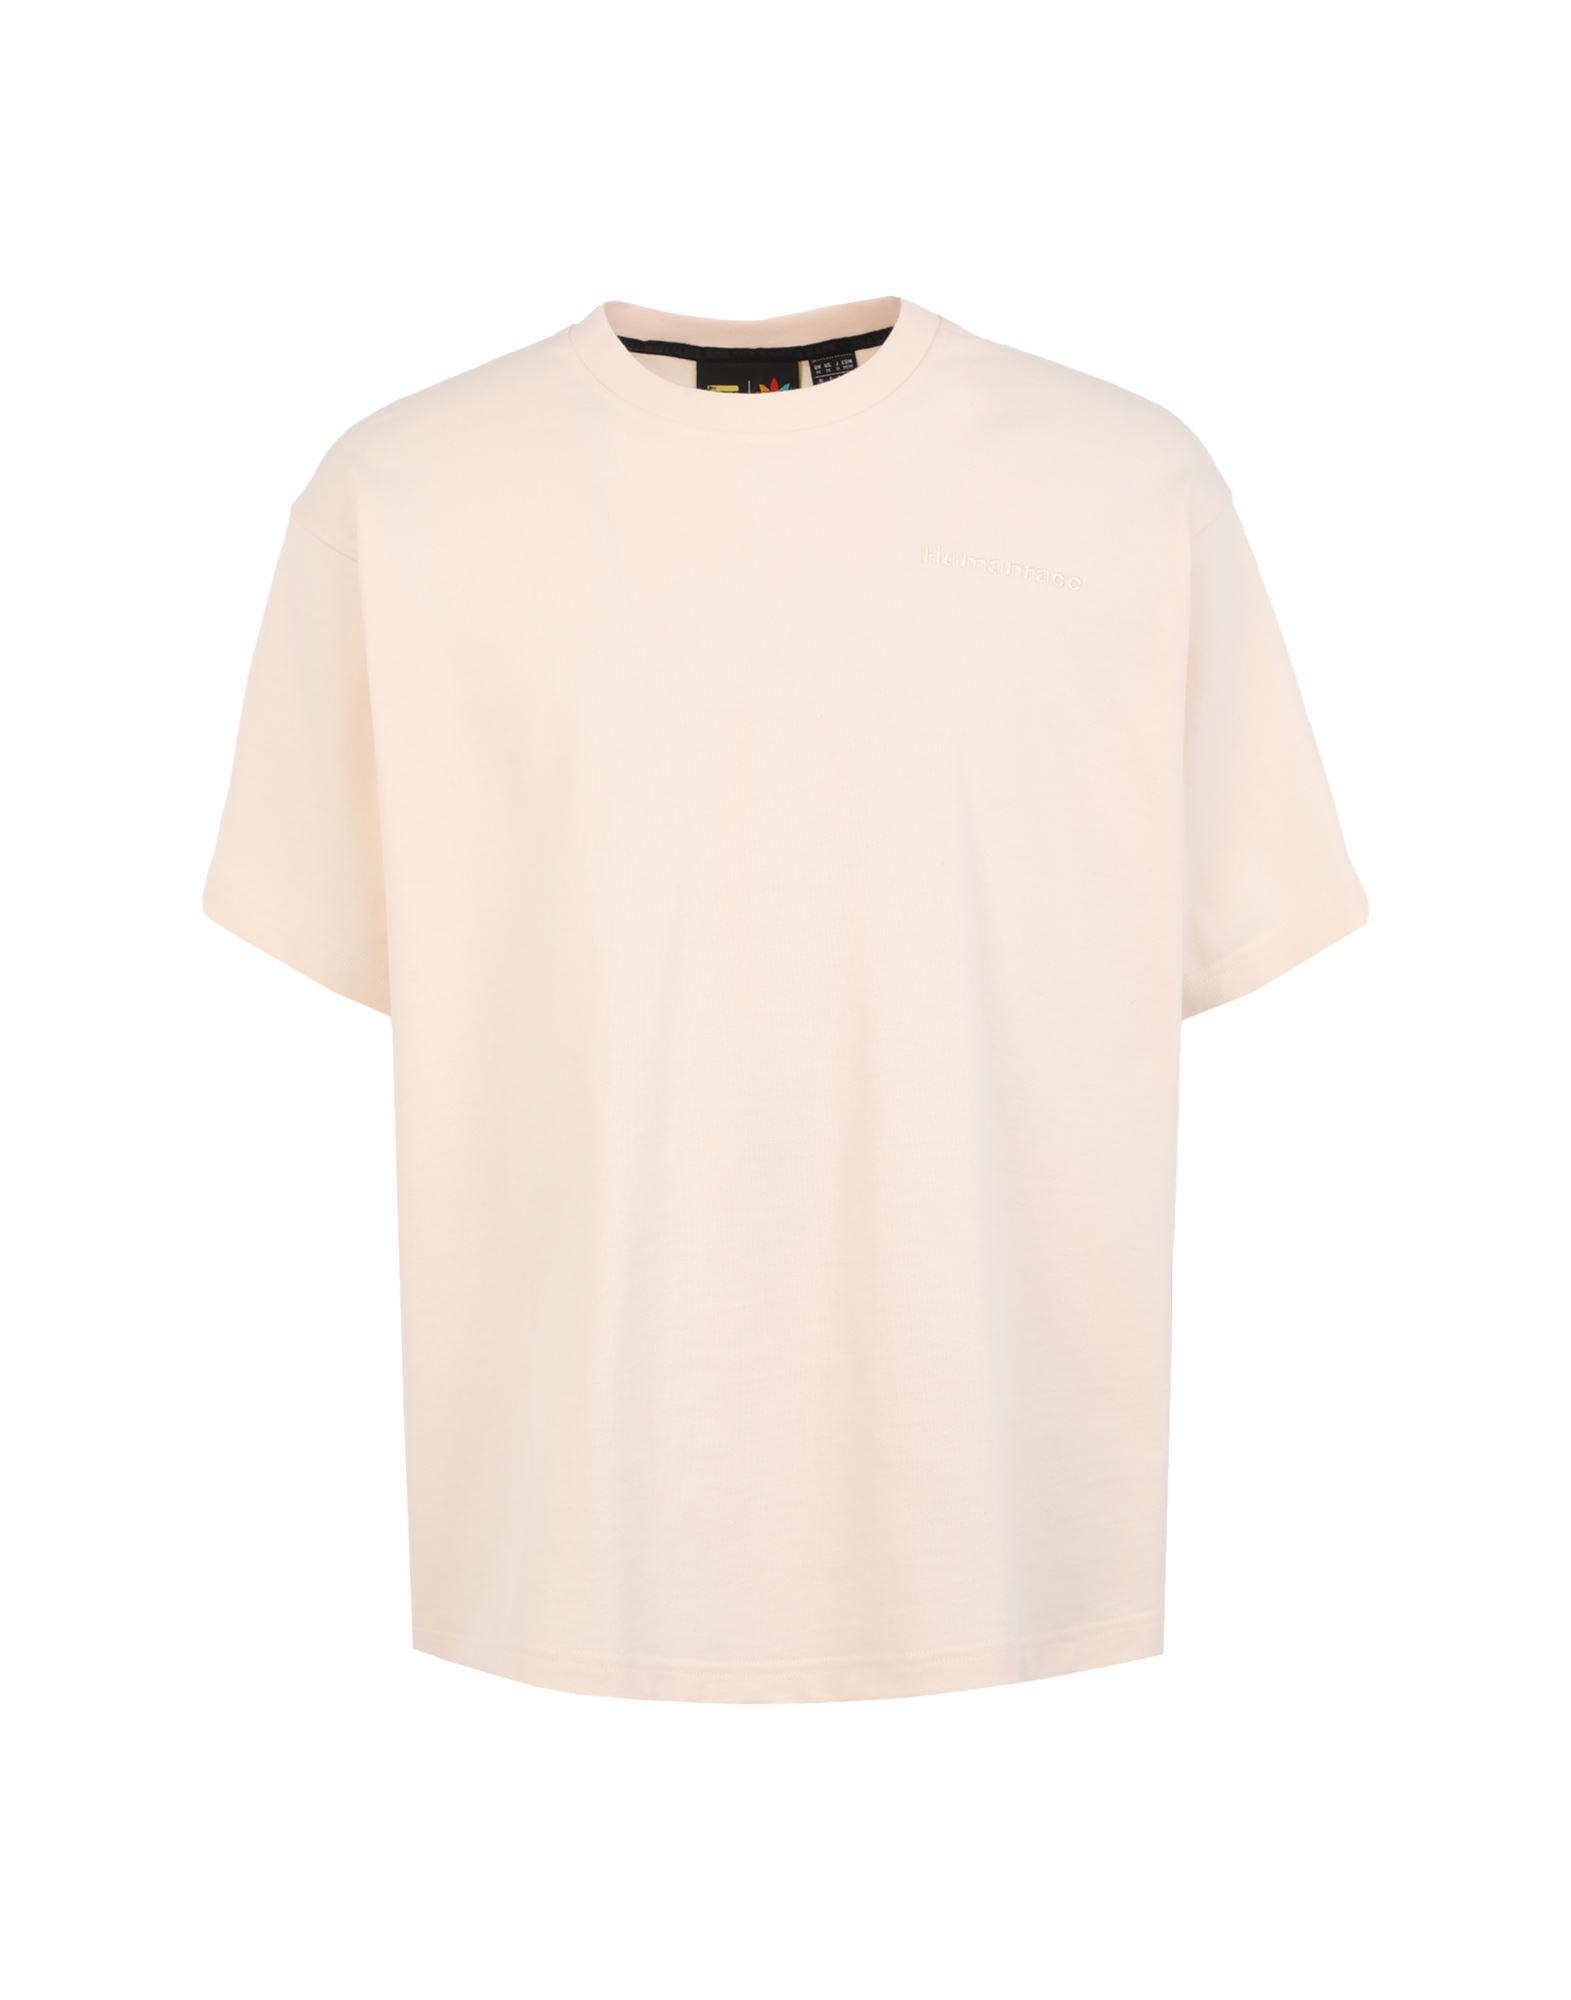 Adidas Originals By Pharrell Williams T-shirts In Pale Pink